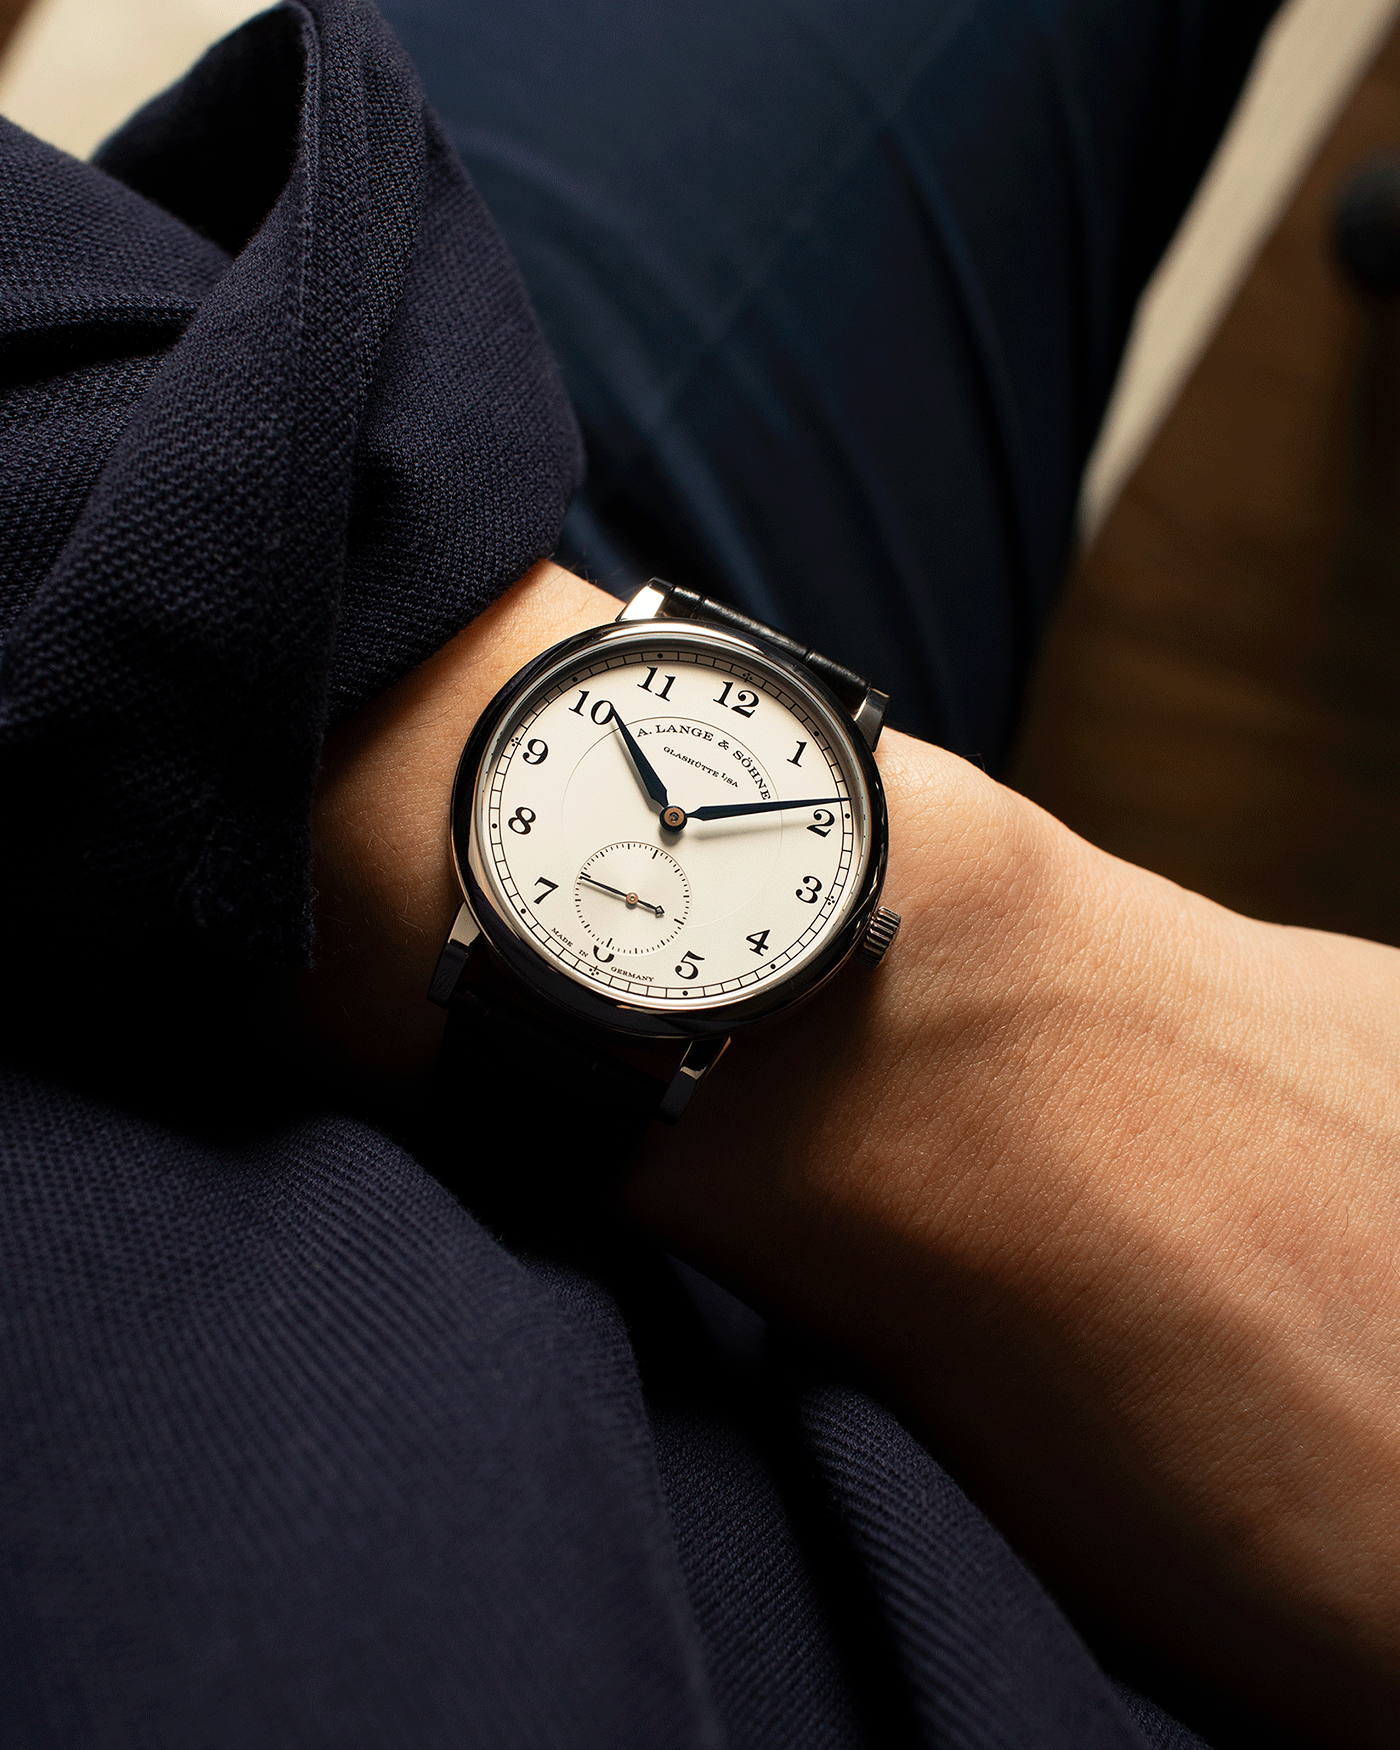 Brand: A. Lange & Sohne Year: 2010’s Model: 1815 Annual Calendar Ref Number: 235.026 Material: 18k White Gold Movement: Manual Winding In-House Cal. L051.1 Case Diameter: 38mm Bracelet/Strap: A. Lange & Sohne Black Alligator Strap with signed 18k White Gold Tang Buckle